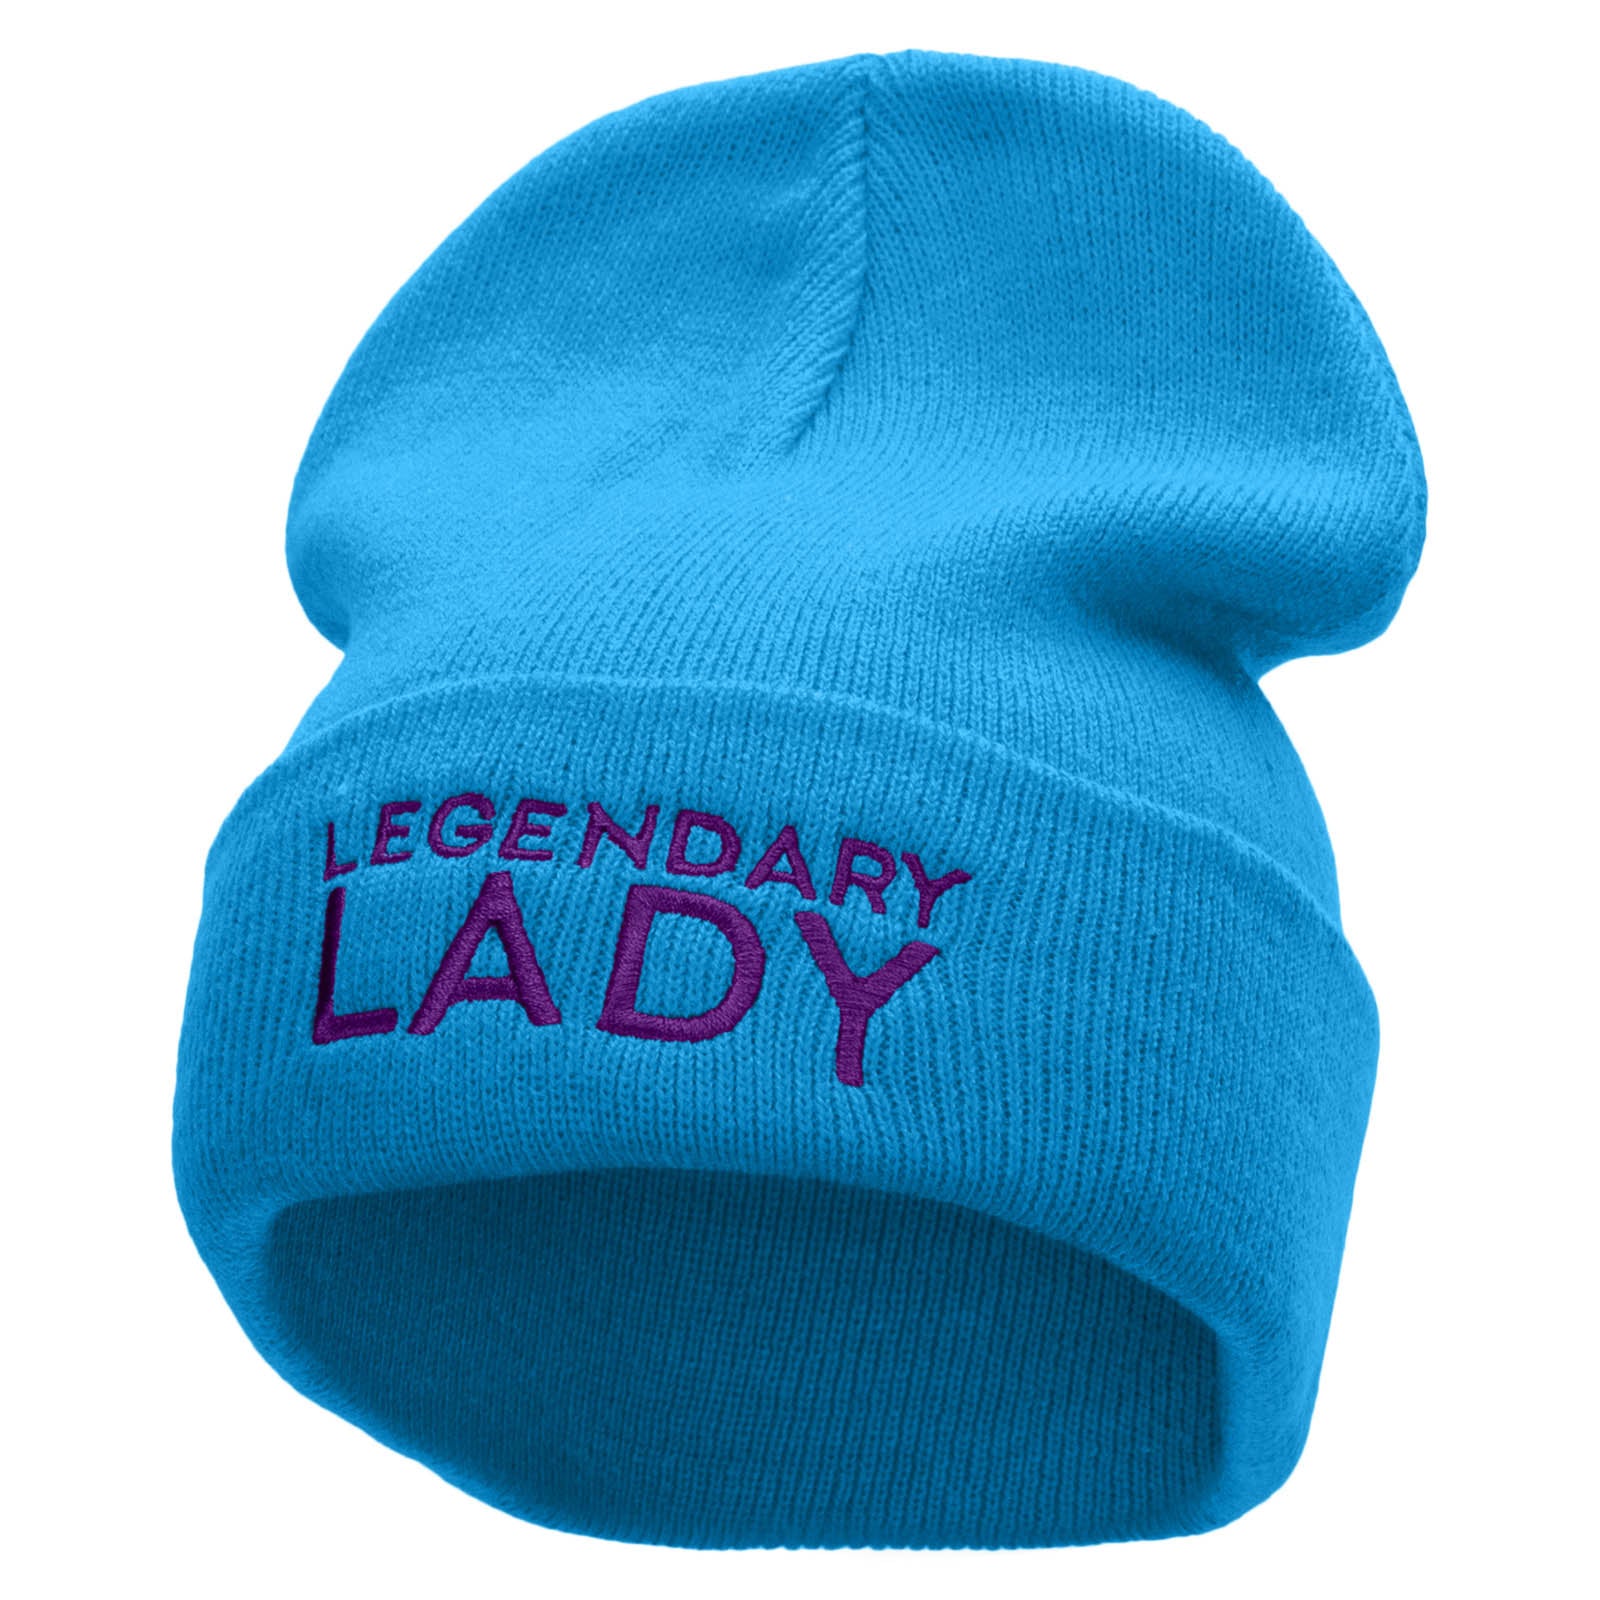 Legendary Lady Embroidered 12 Inch Long Knitted Beanie - Aqua OSFM